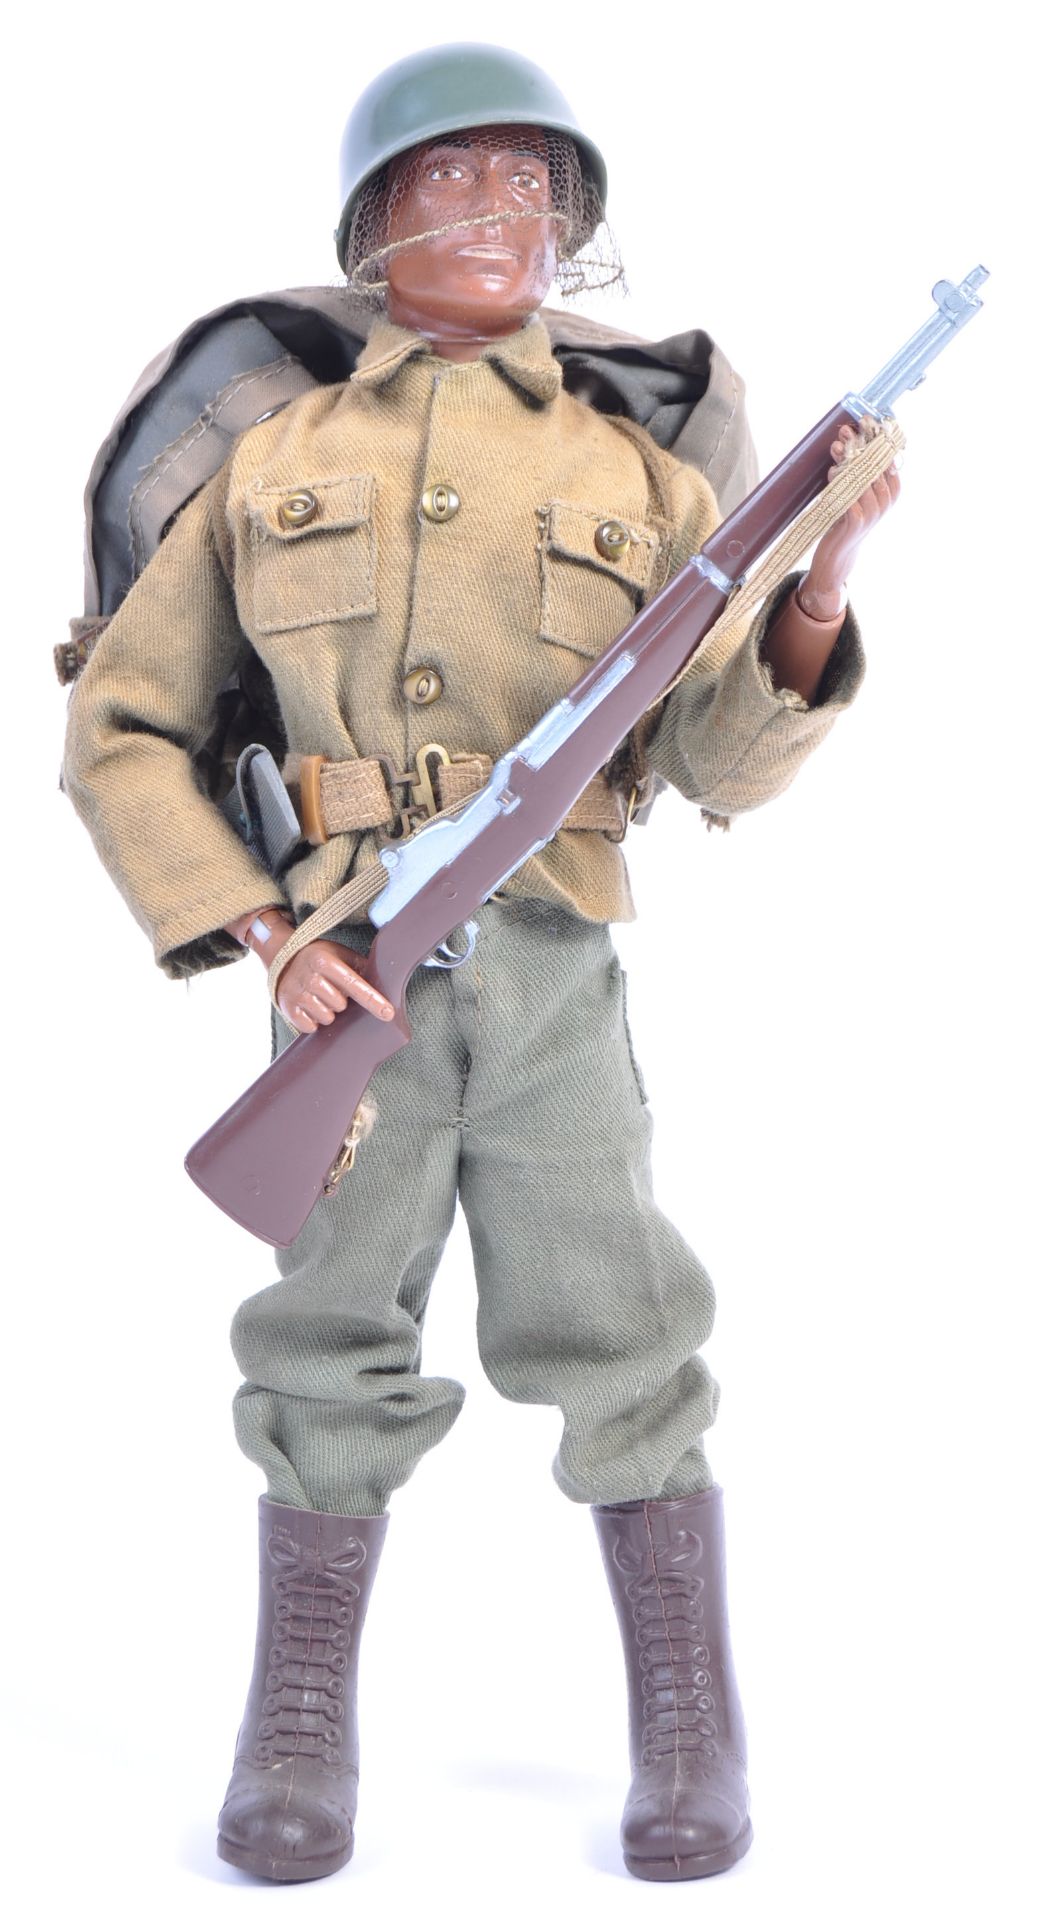 ACTION MAN - ORIGINAL US ARMY OUTFIT AND ACTION MAN FIGURE